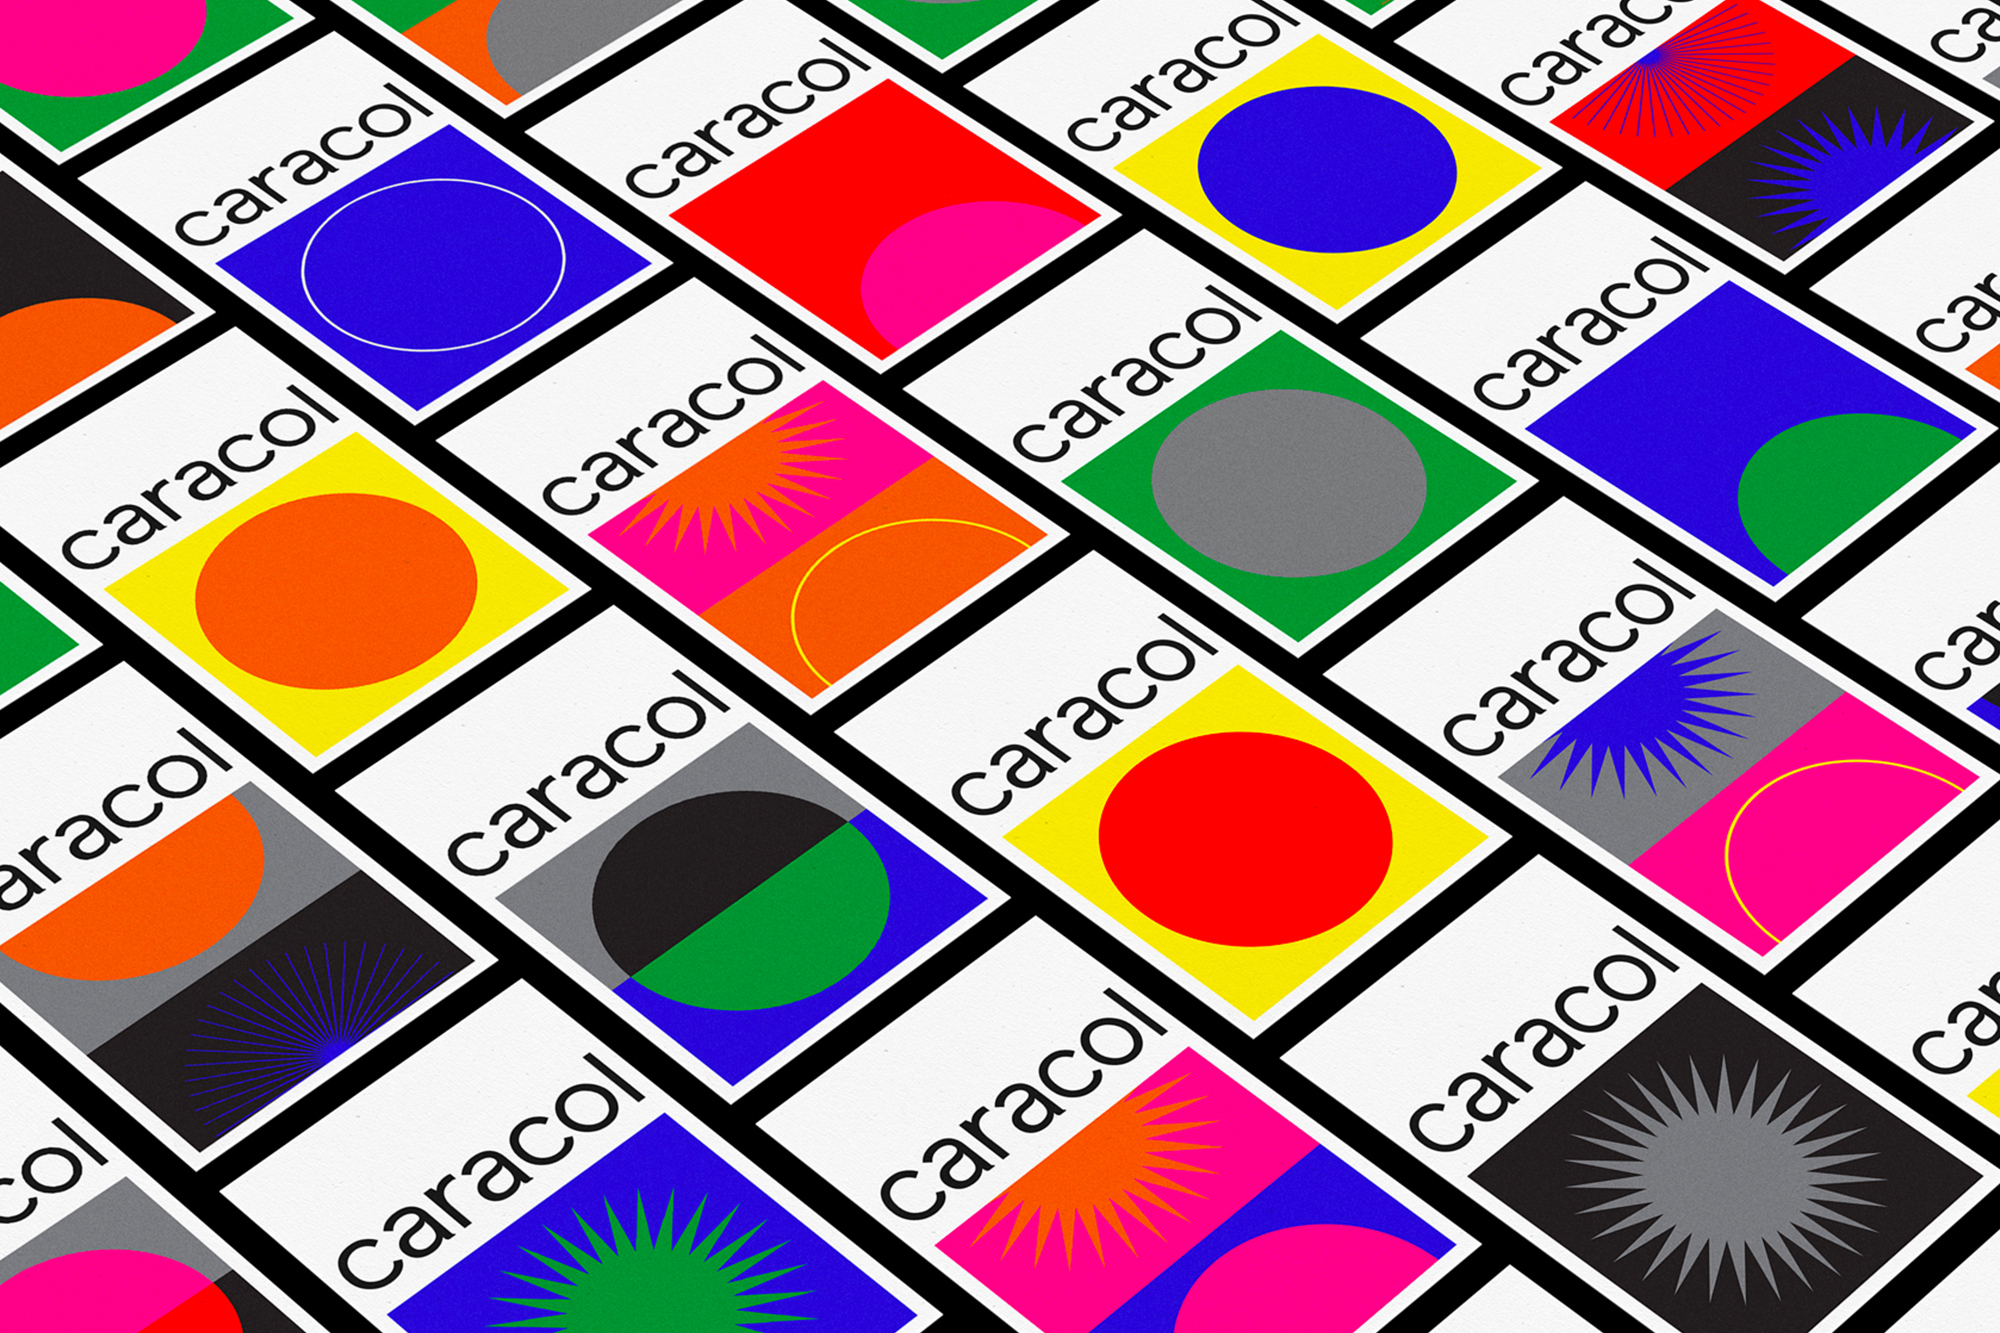 Universal Favourite's rebrand of Colour Mill captures the vibrant